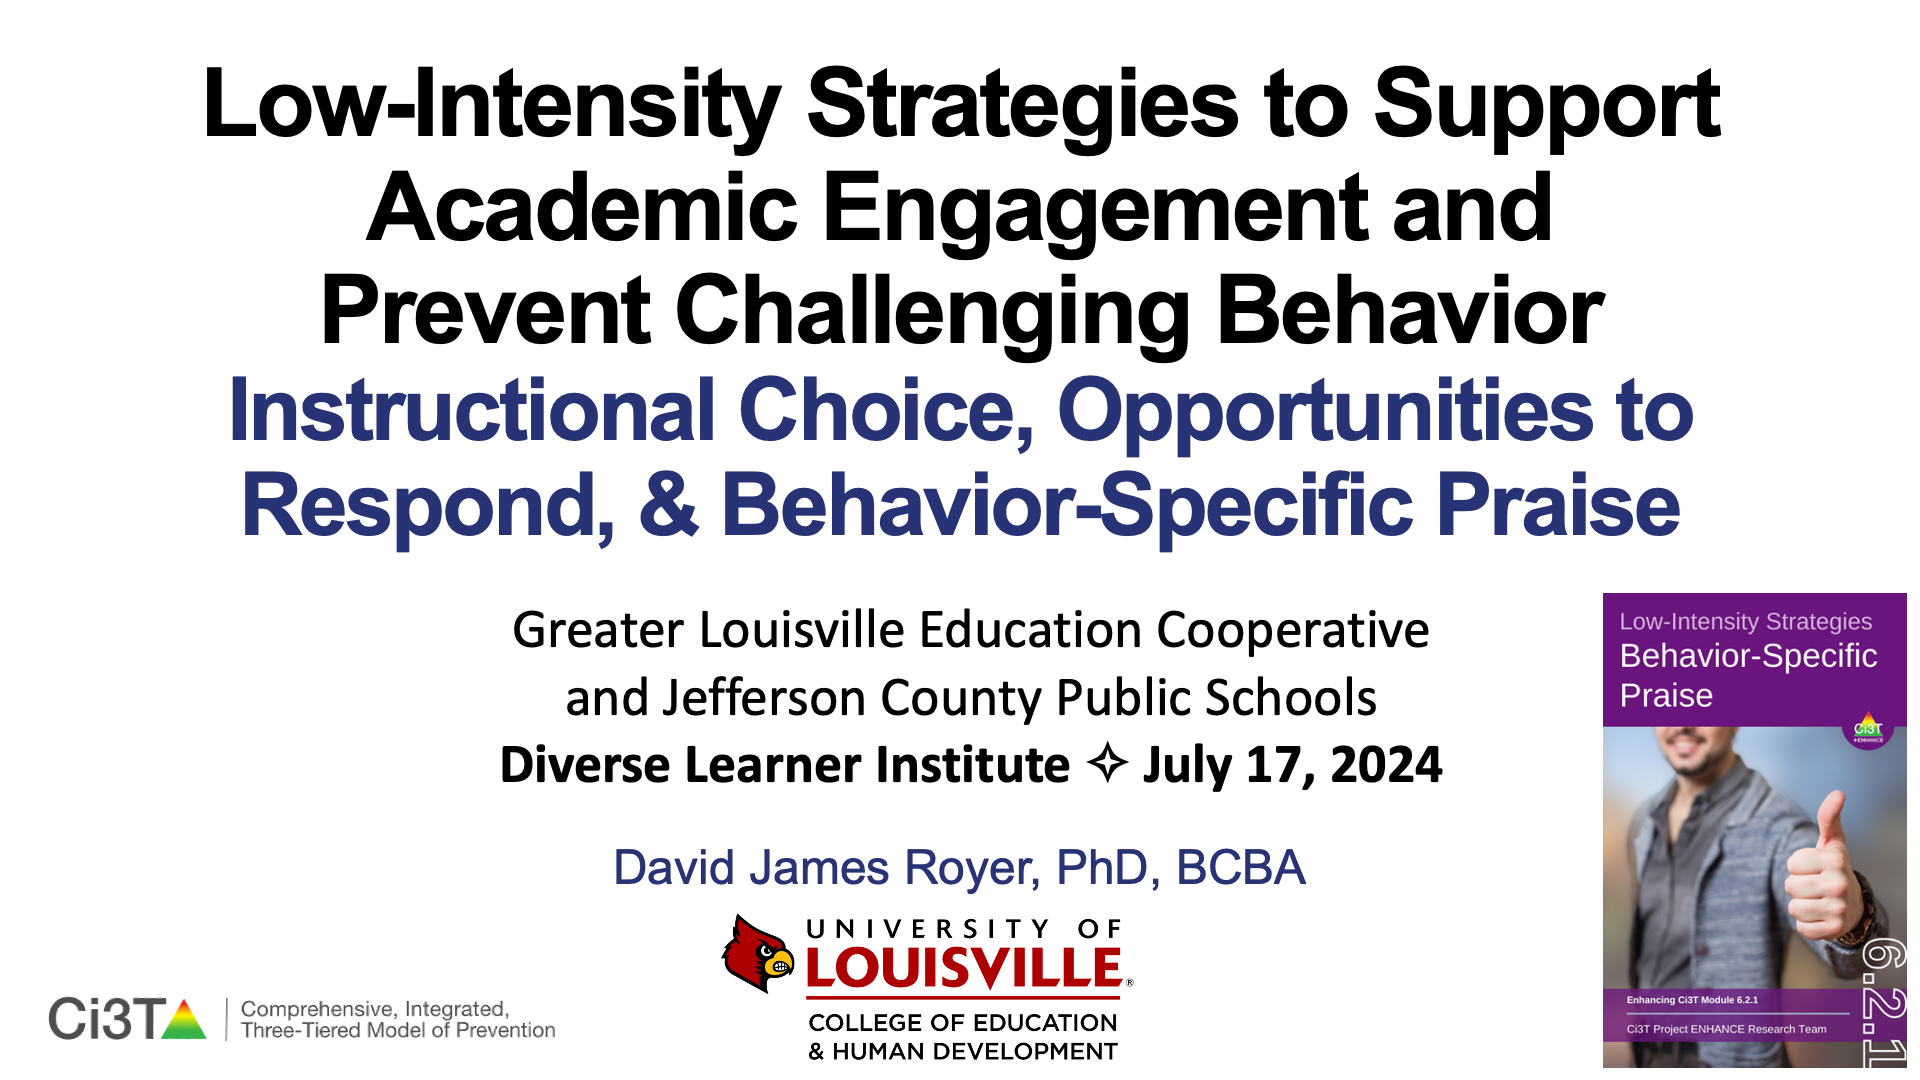 Low-Intensity Strategies to Support Academic Engagement and Prevent Challenging Behavior: Instructional Choice, Opportunities to Respond, and Behavior-Specific Praise Presentation at GLEC JCPS DLI